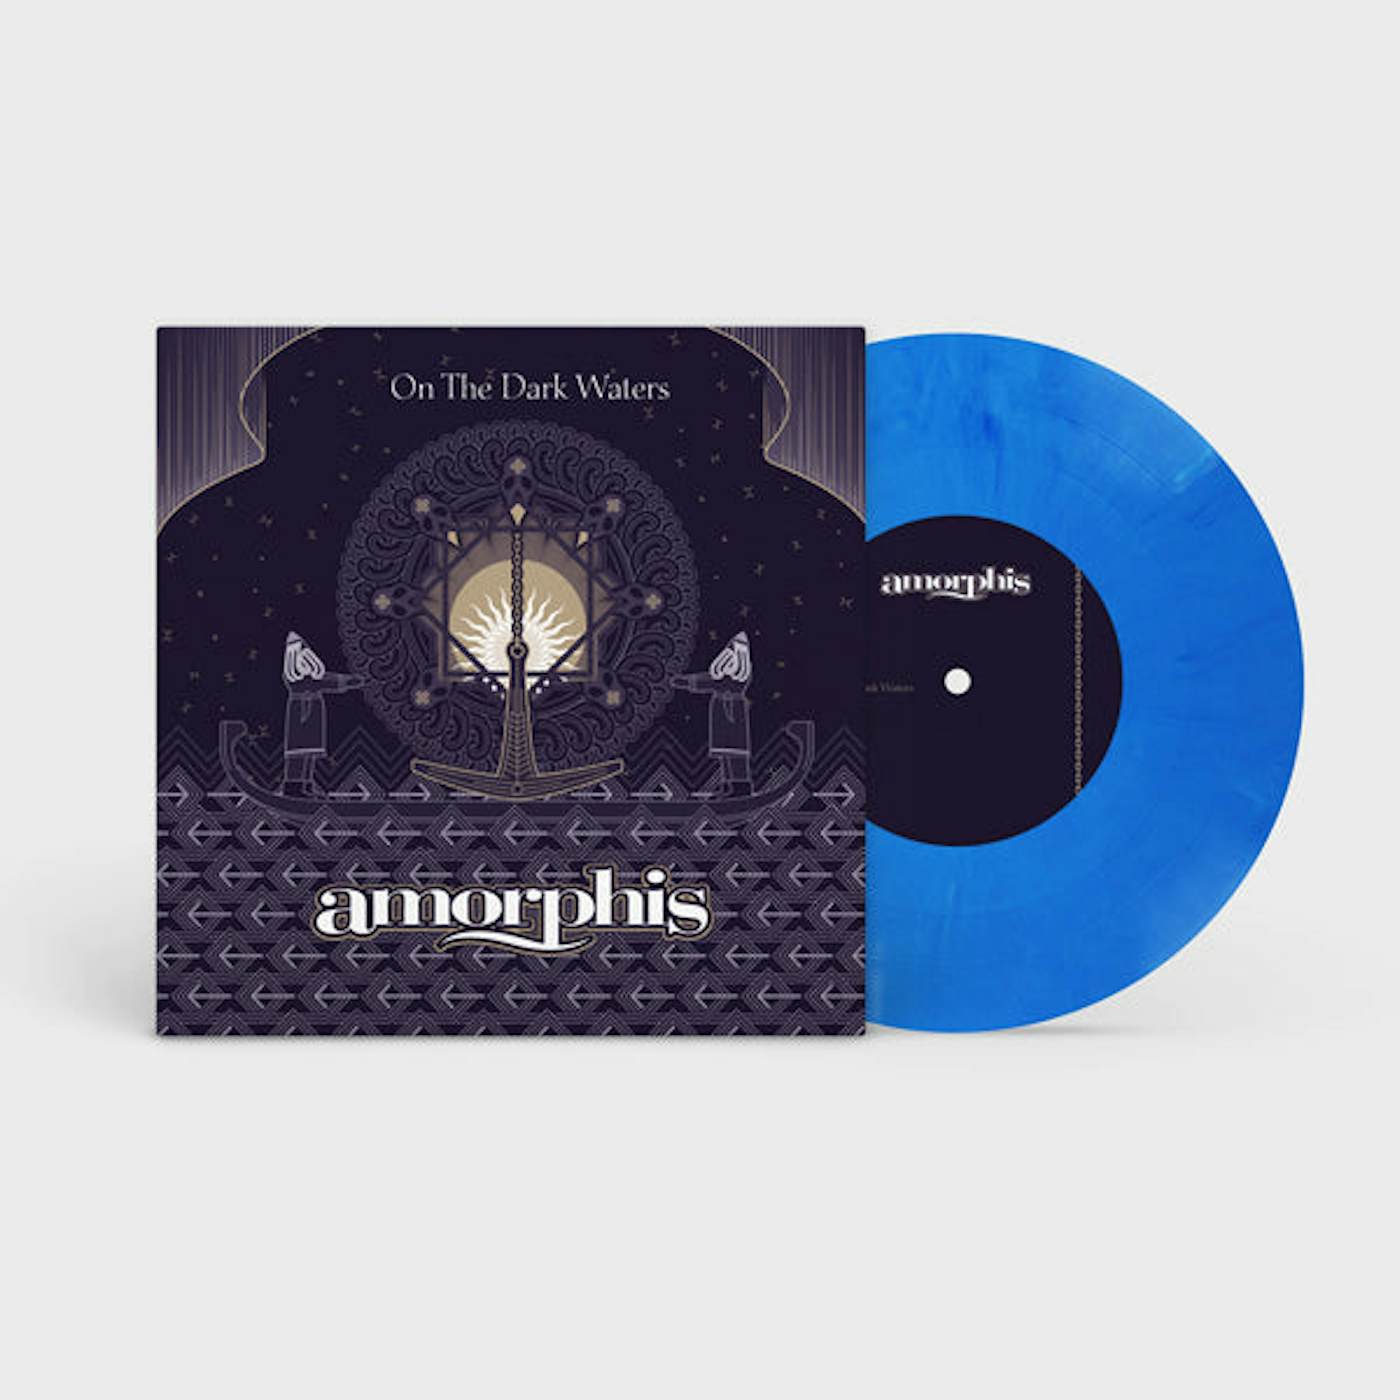 Amorphis LP - On The Dark Waters (Blue/White Marbled Vinyl)